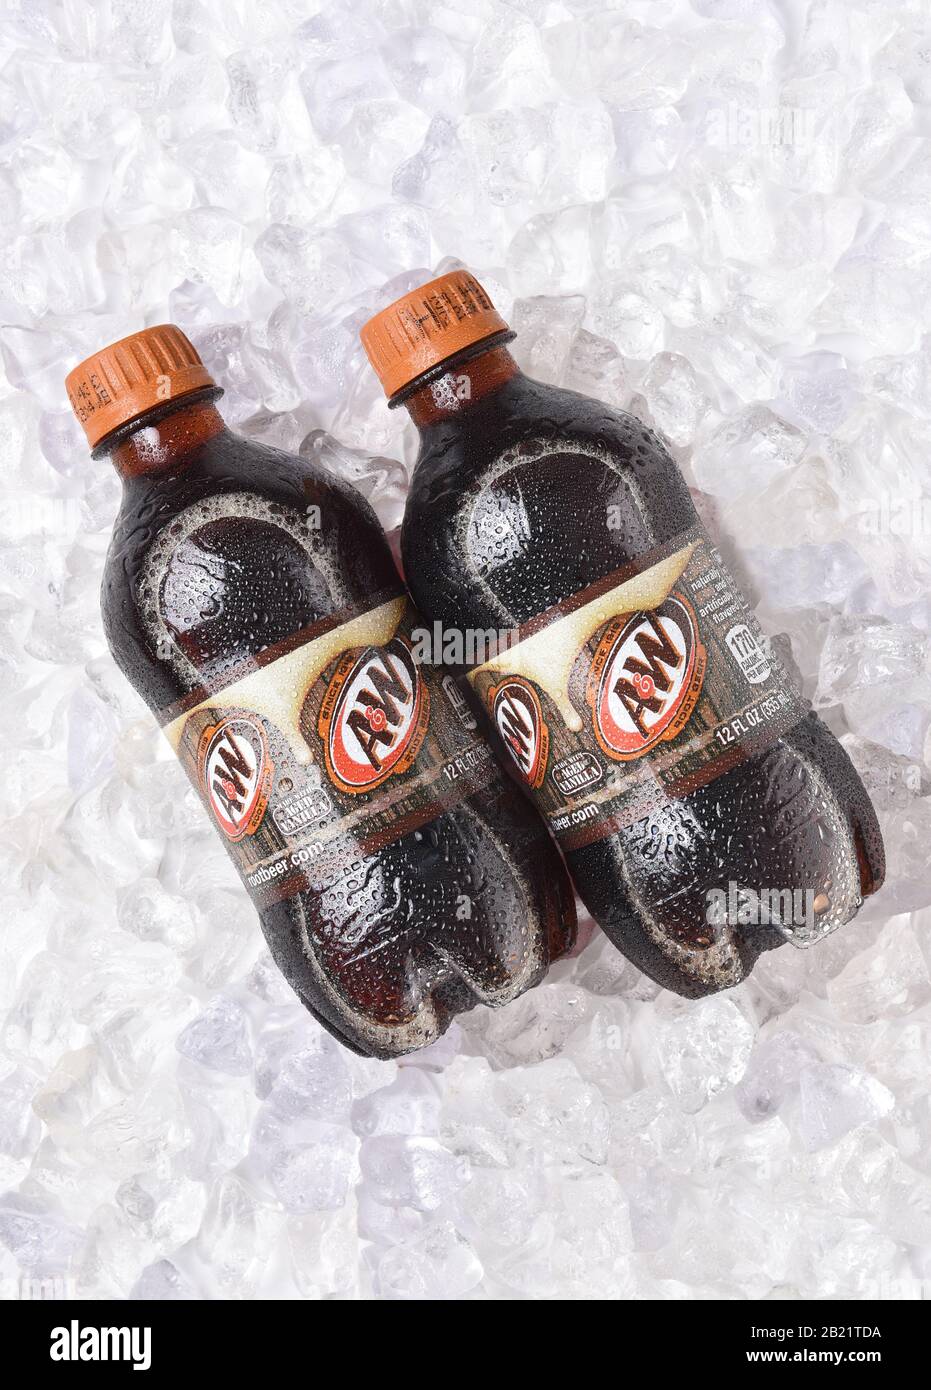 Who Owns A&W Root Beer? All About the Company